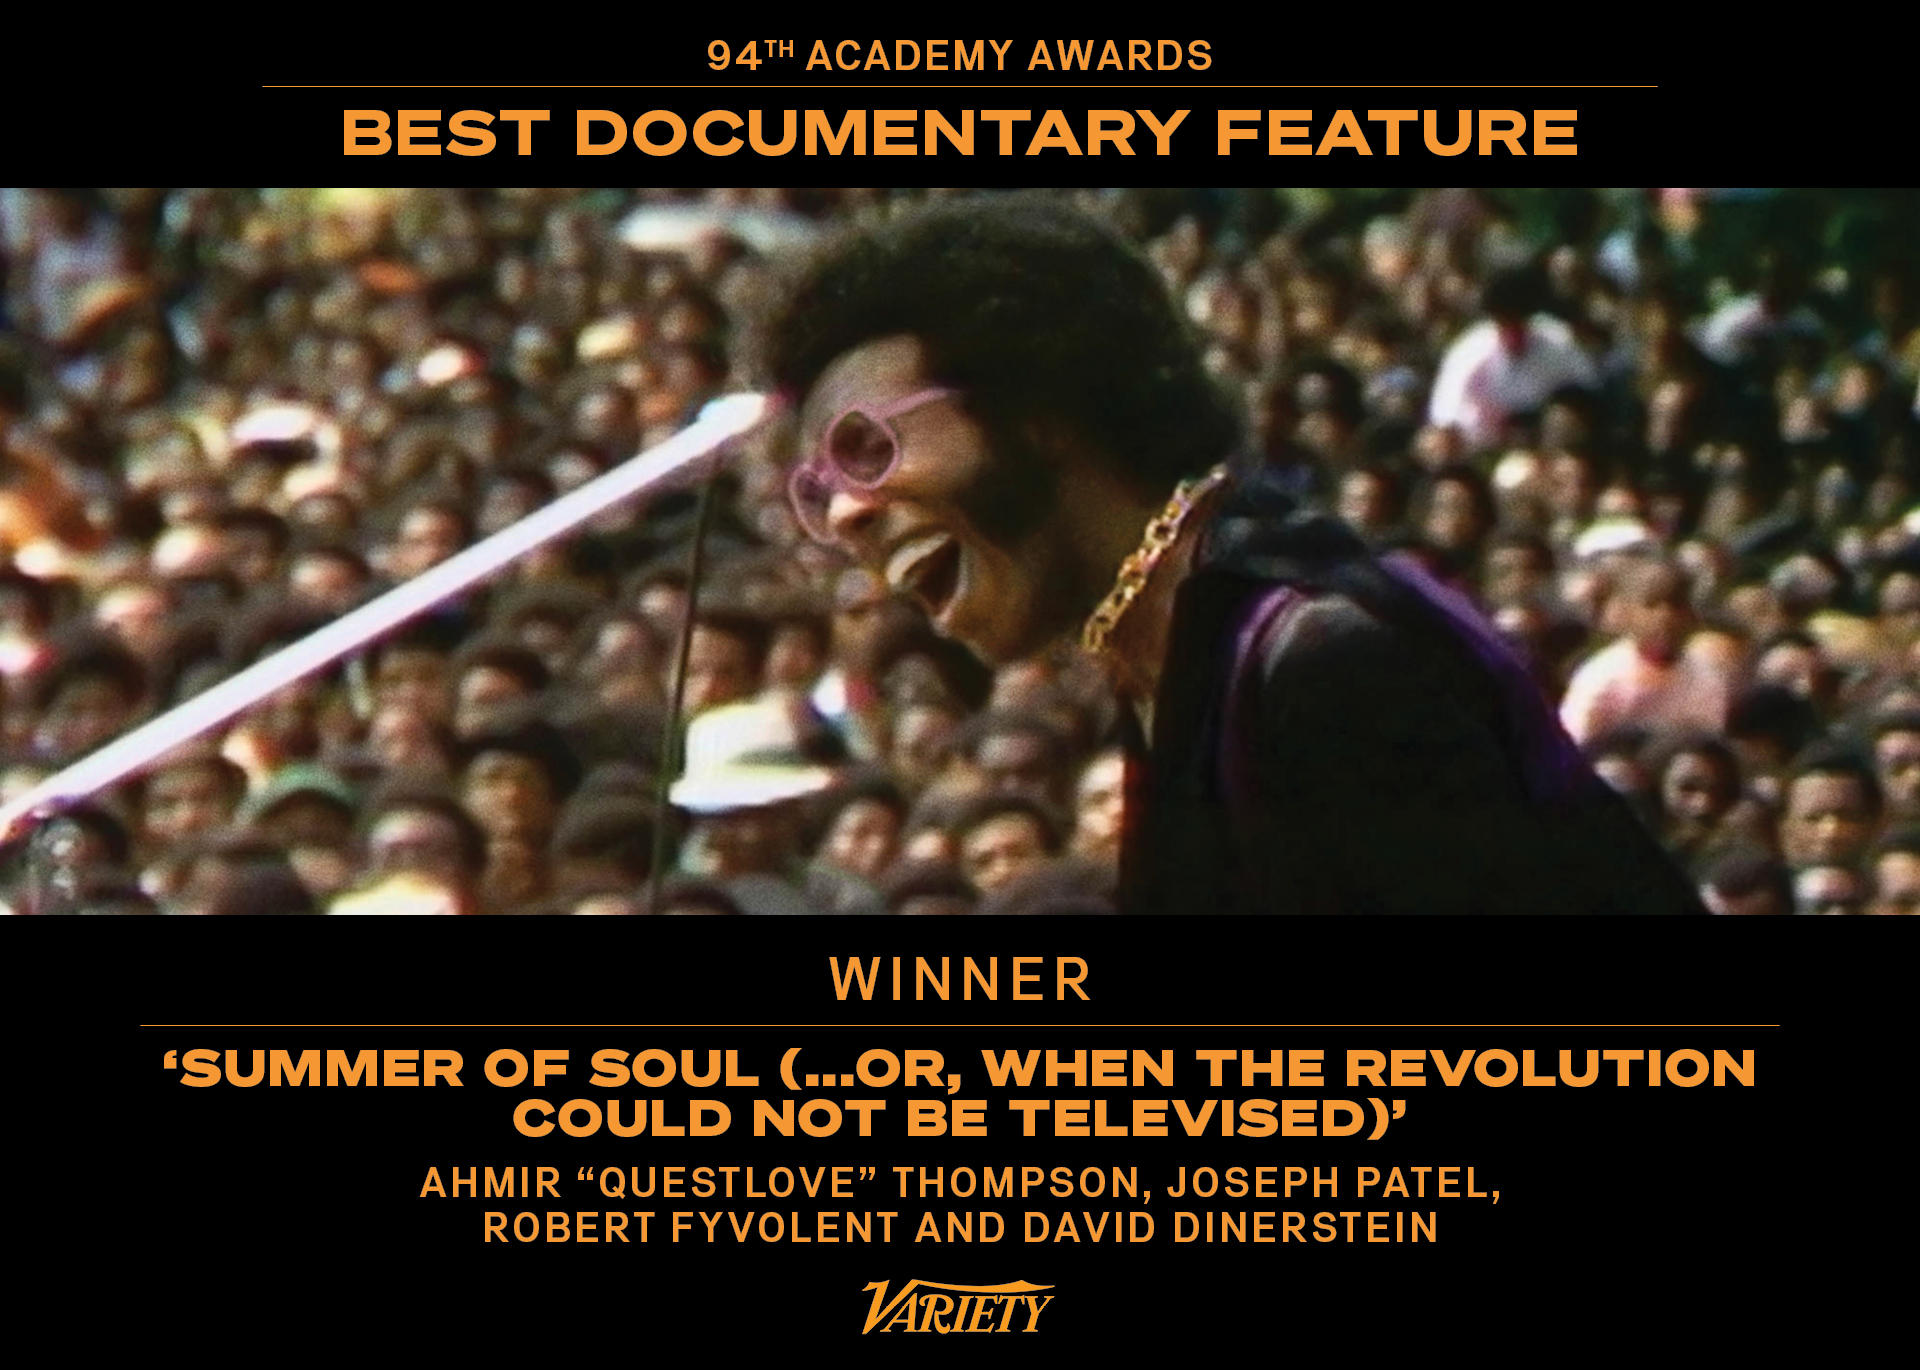 Performer image from the Harlem Cultural Festival with text above and below highlighting the Best Documentary Oscar Win for Summer of Soul and crediting the directors and producers involved with the film. 